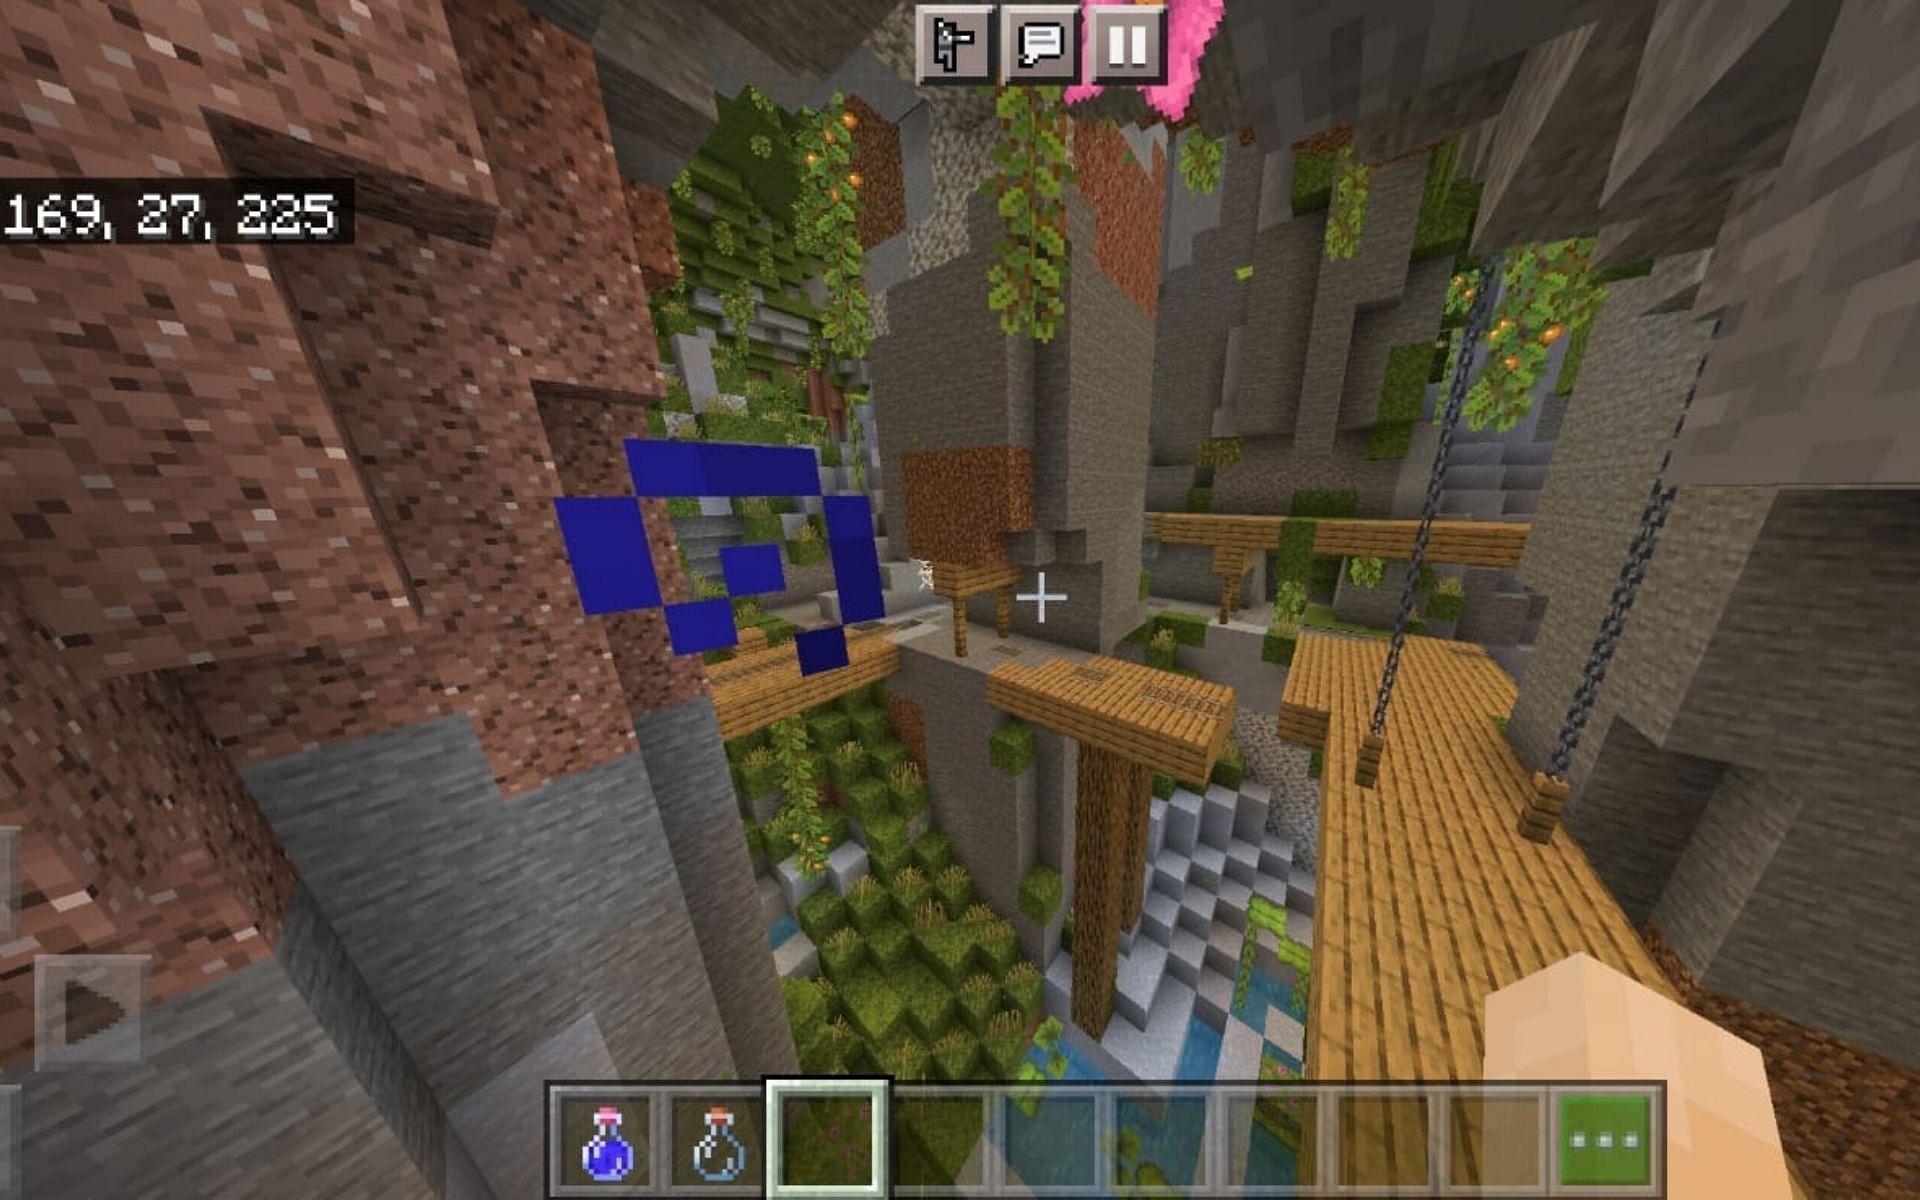 Lush Caves Biome with a Mineshaft (Image via Minecraft)